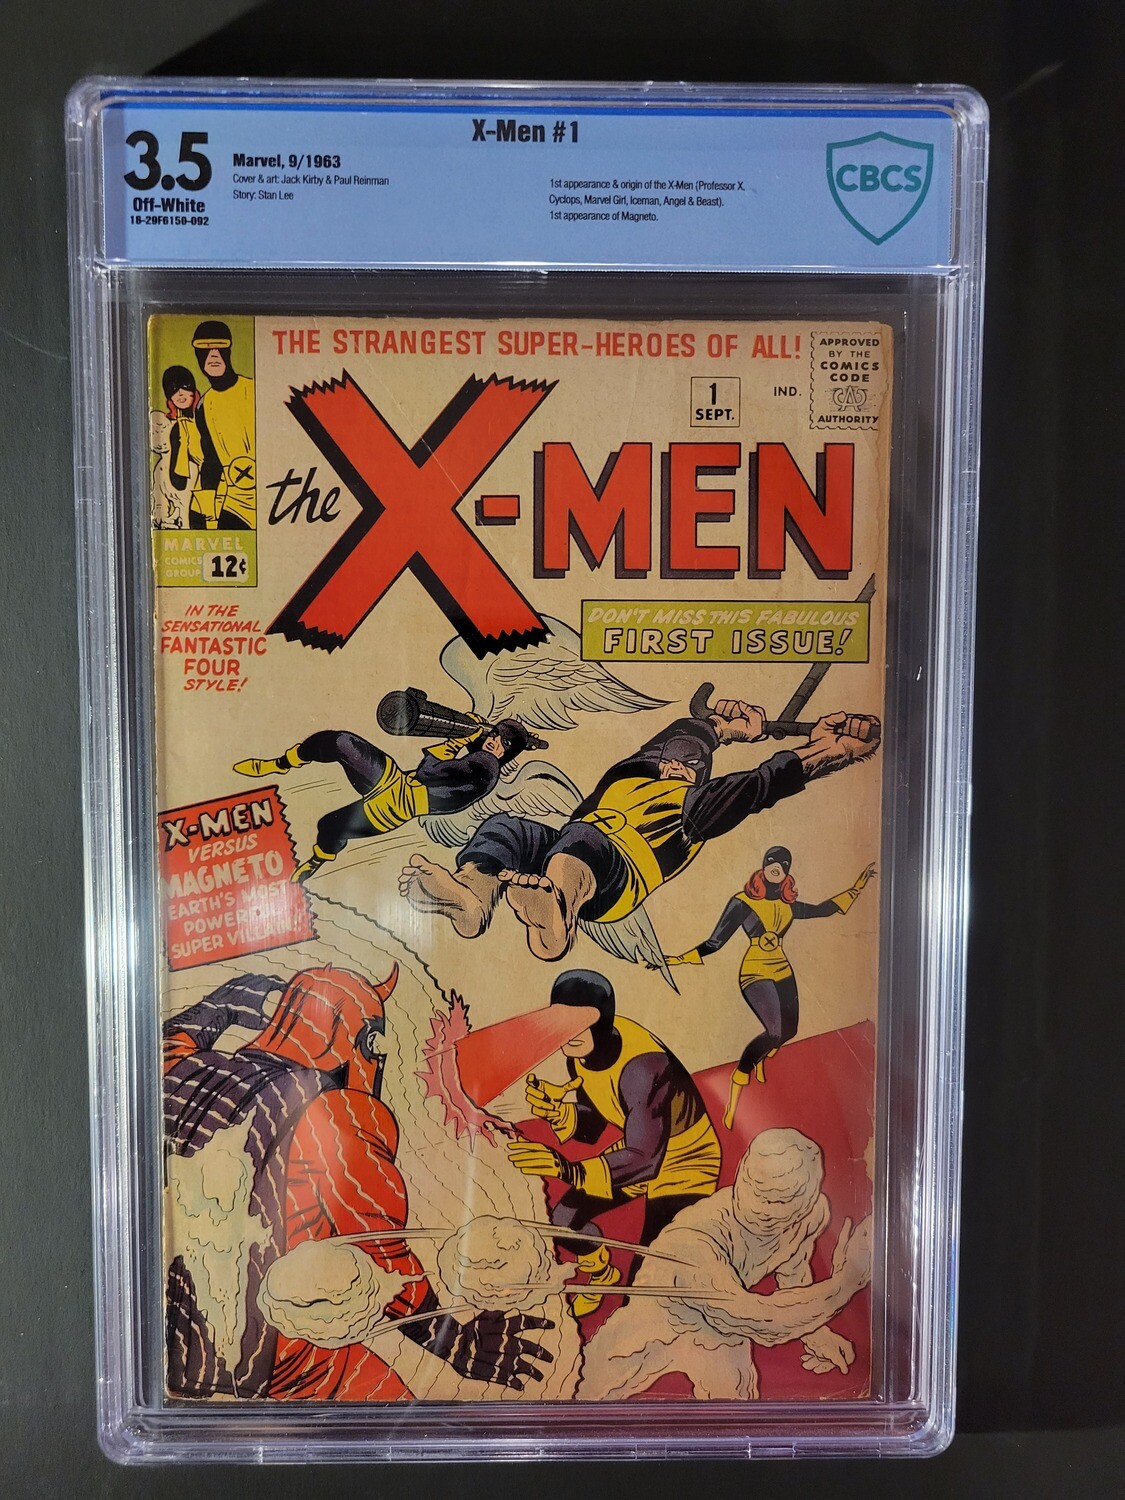 X-Men #1 CBCS 3.5 1st appearance and origin of the X-Men and 1st appearance of Magneto